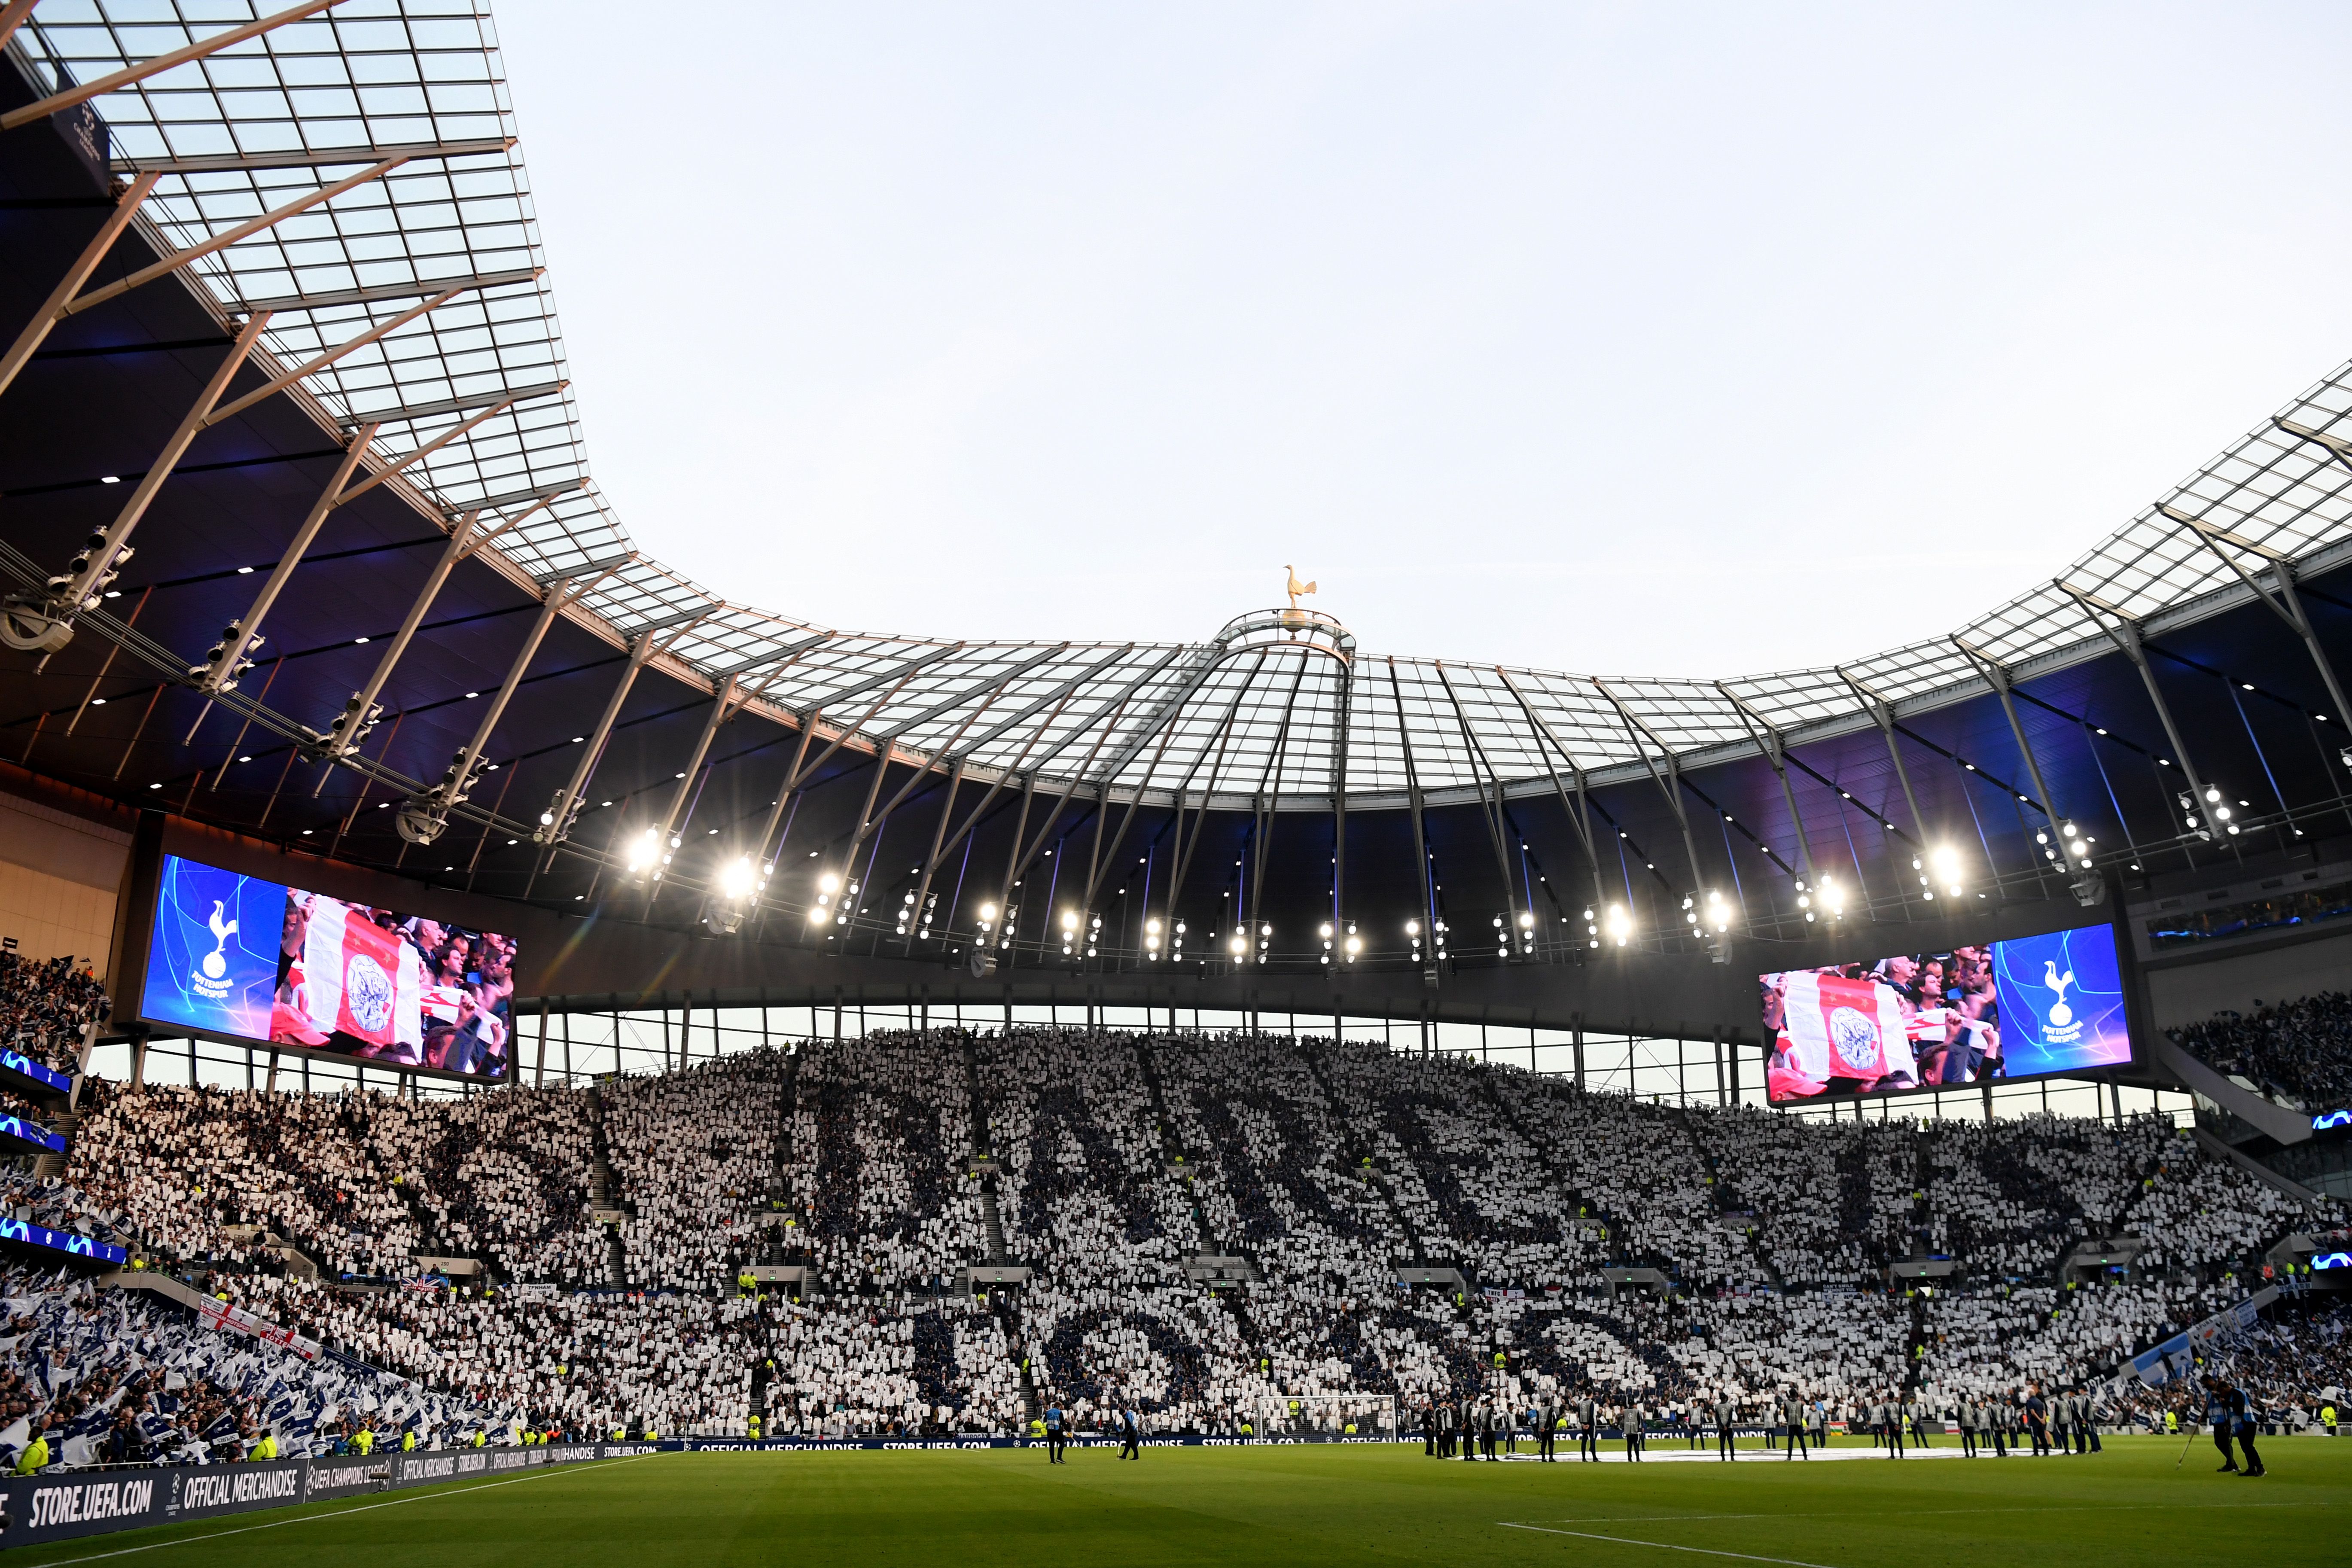 Spurs fans welcome their team prior to the UEFA Champions League Semi Final 